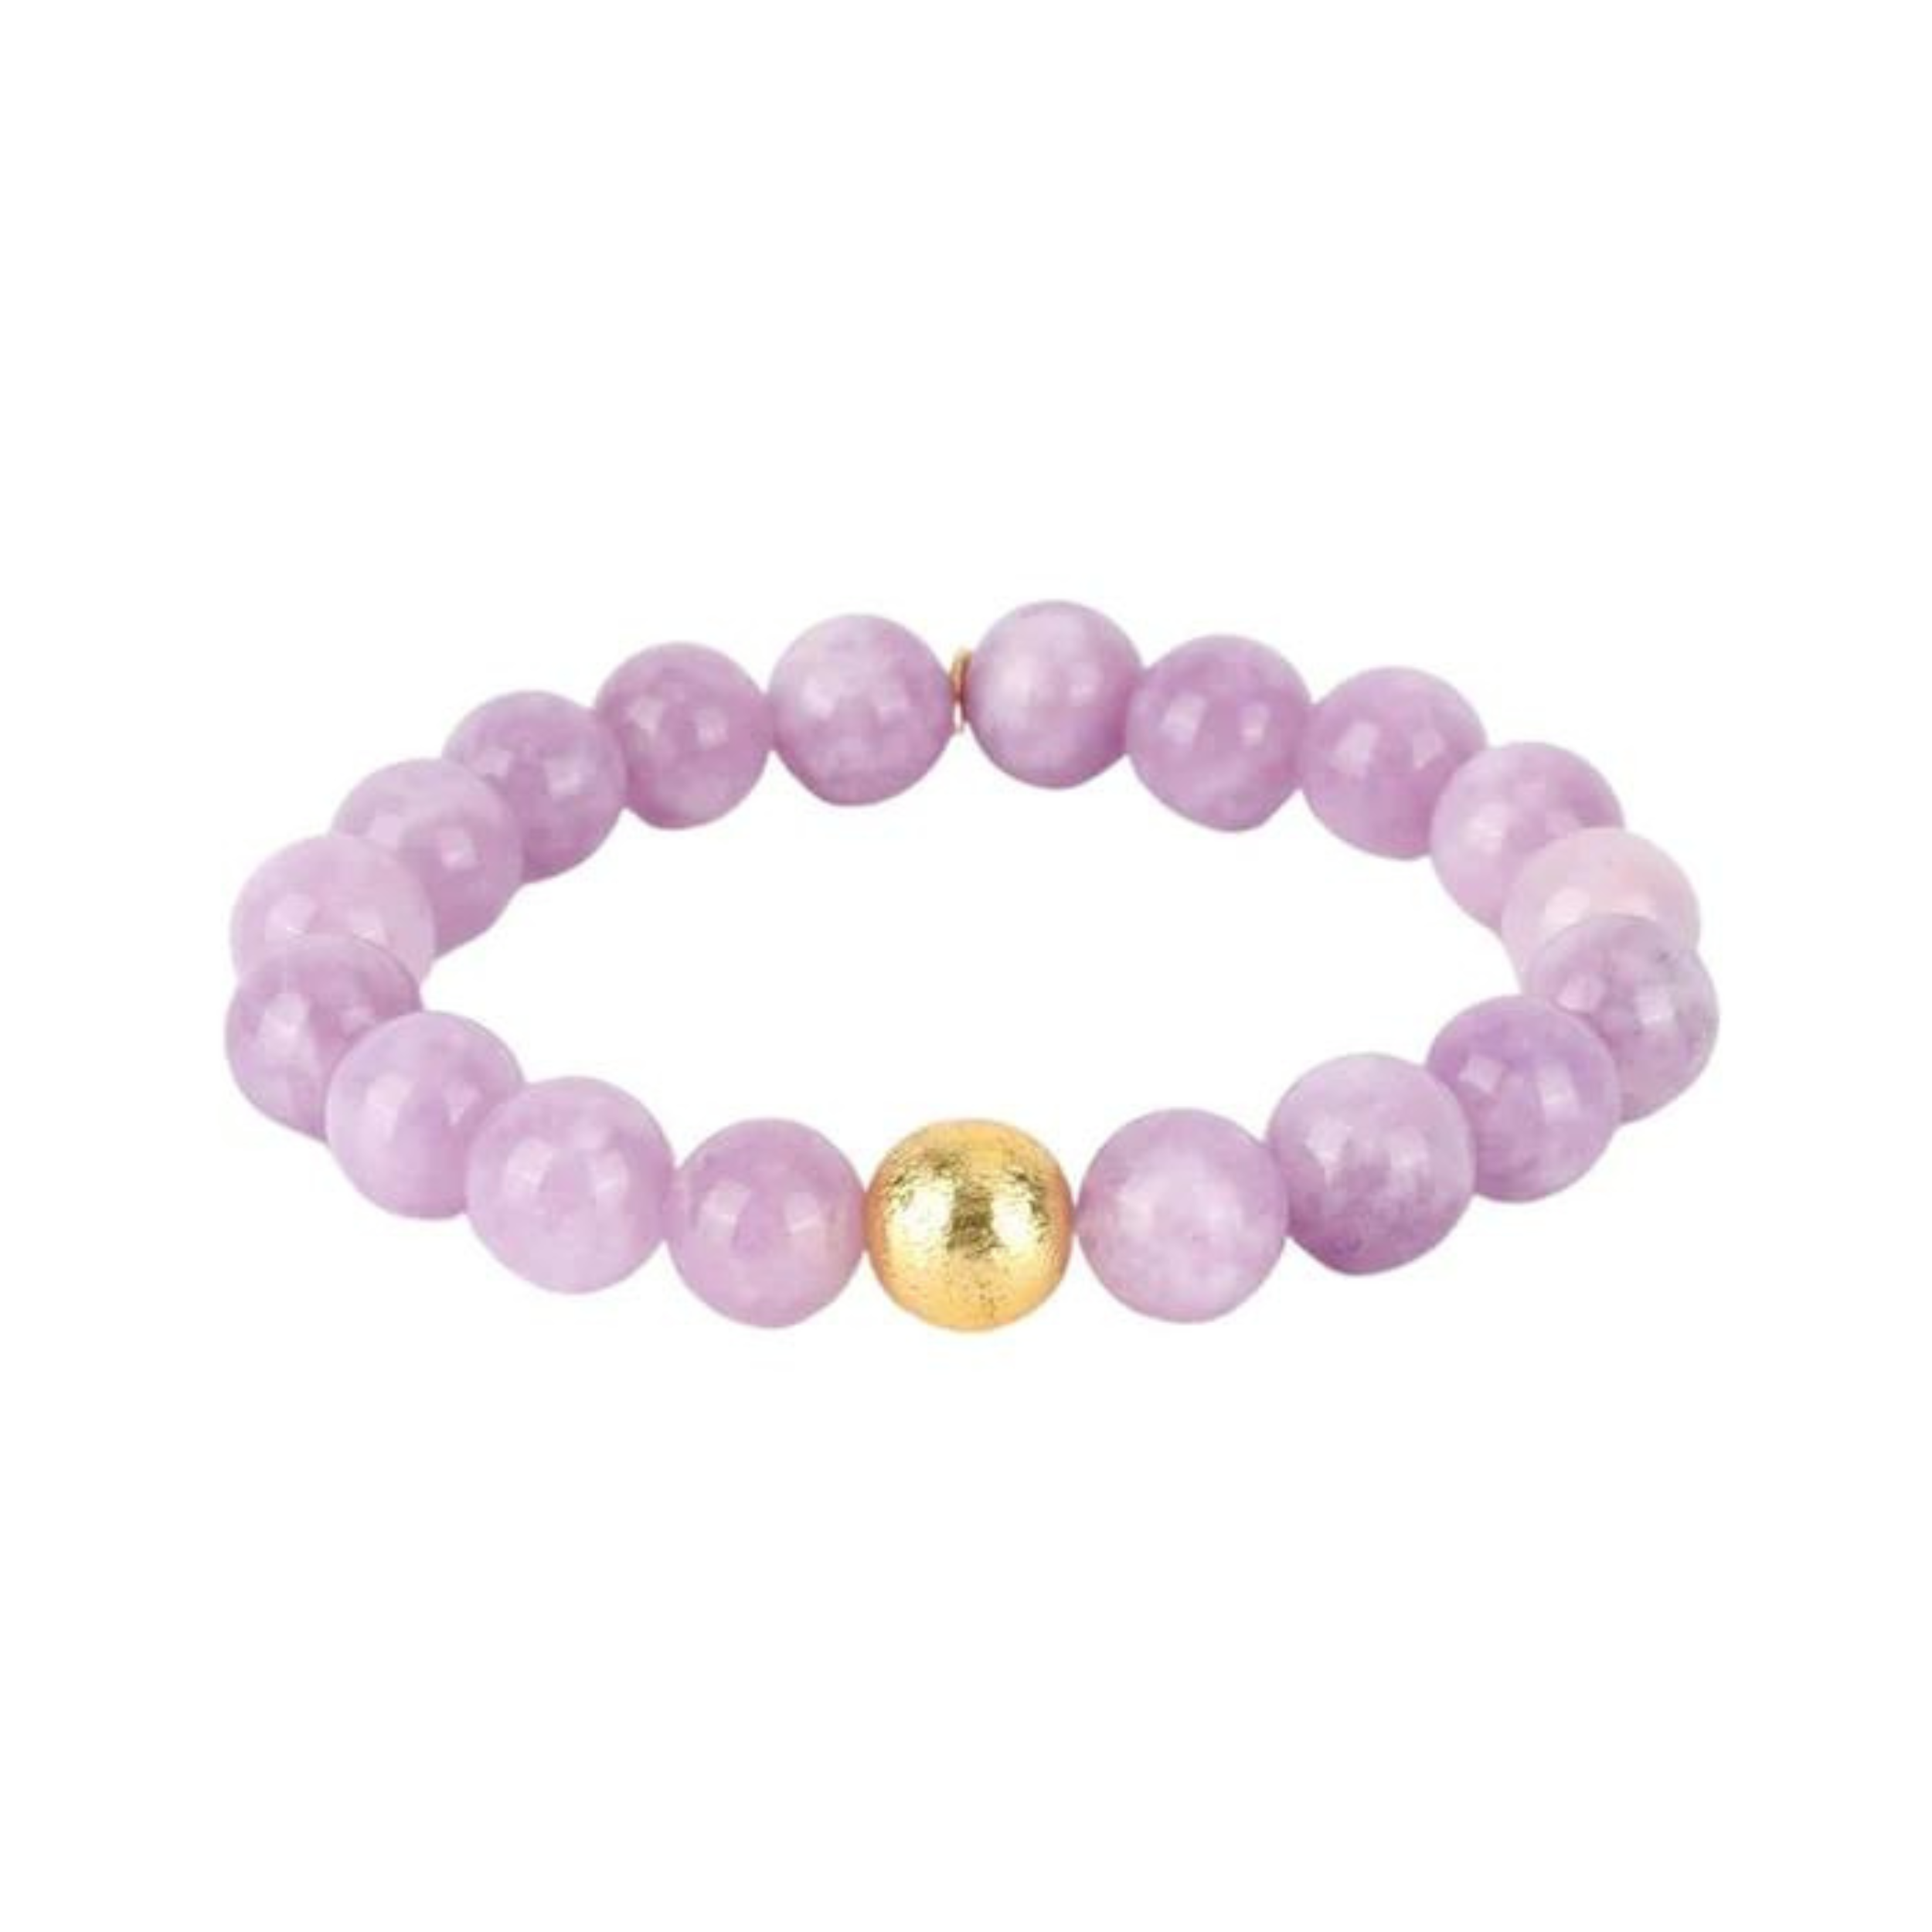 BuDhaGirl | Bianca Bracelet in Wisteria - Giddy Up Glamour Boutique